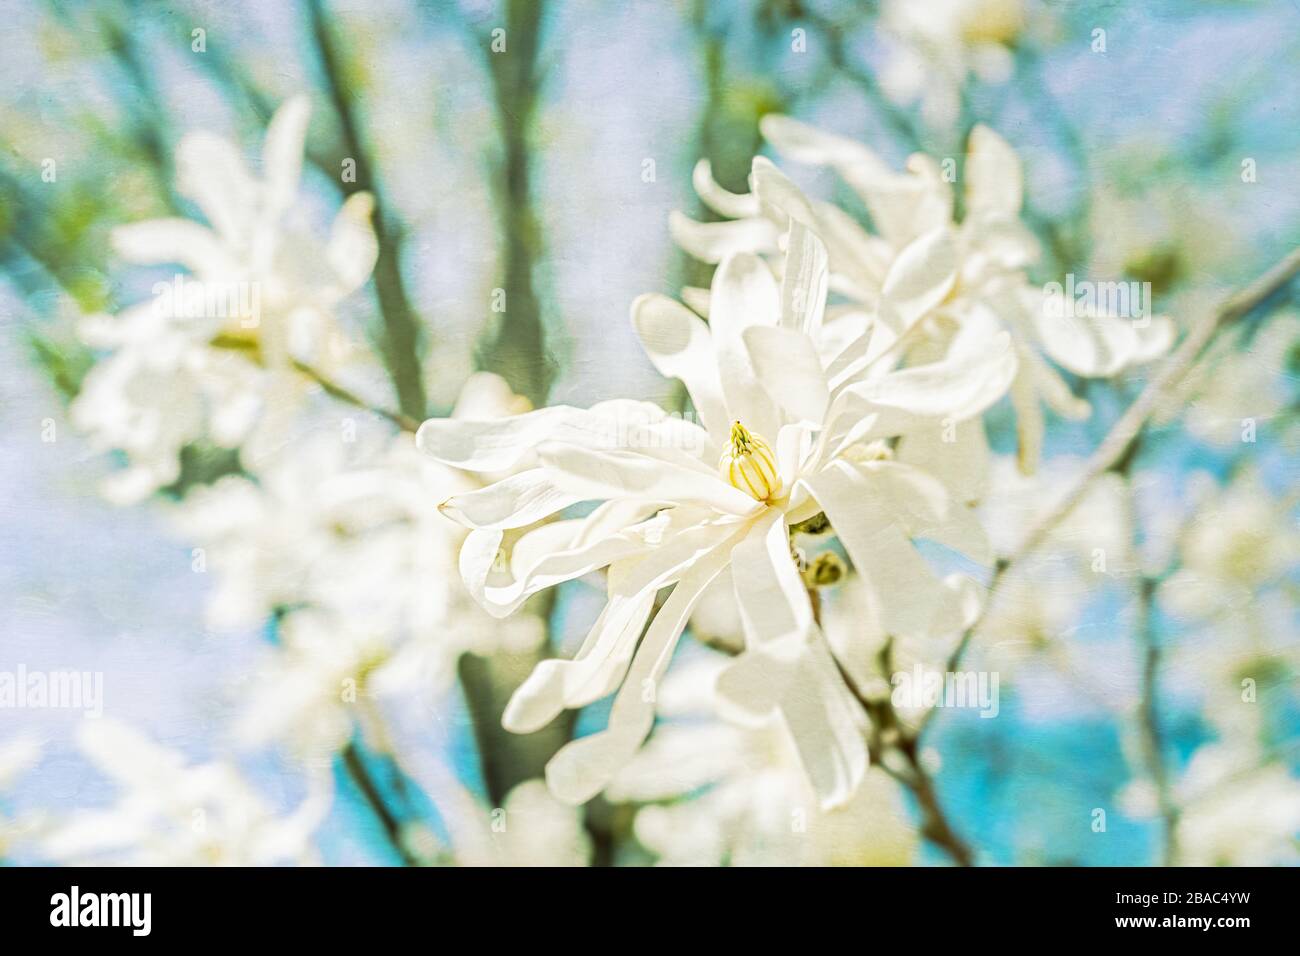 Merrill Star Magnolia, a small tree or shrub in the spring garden. Texturizing element added. Stock Photo